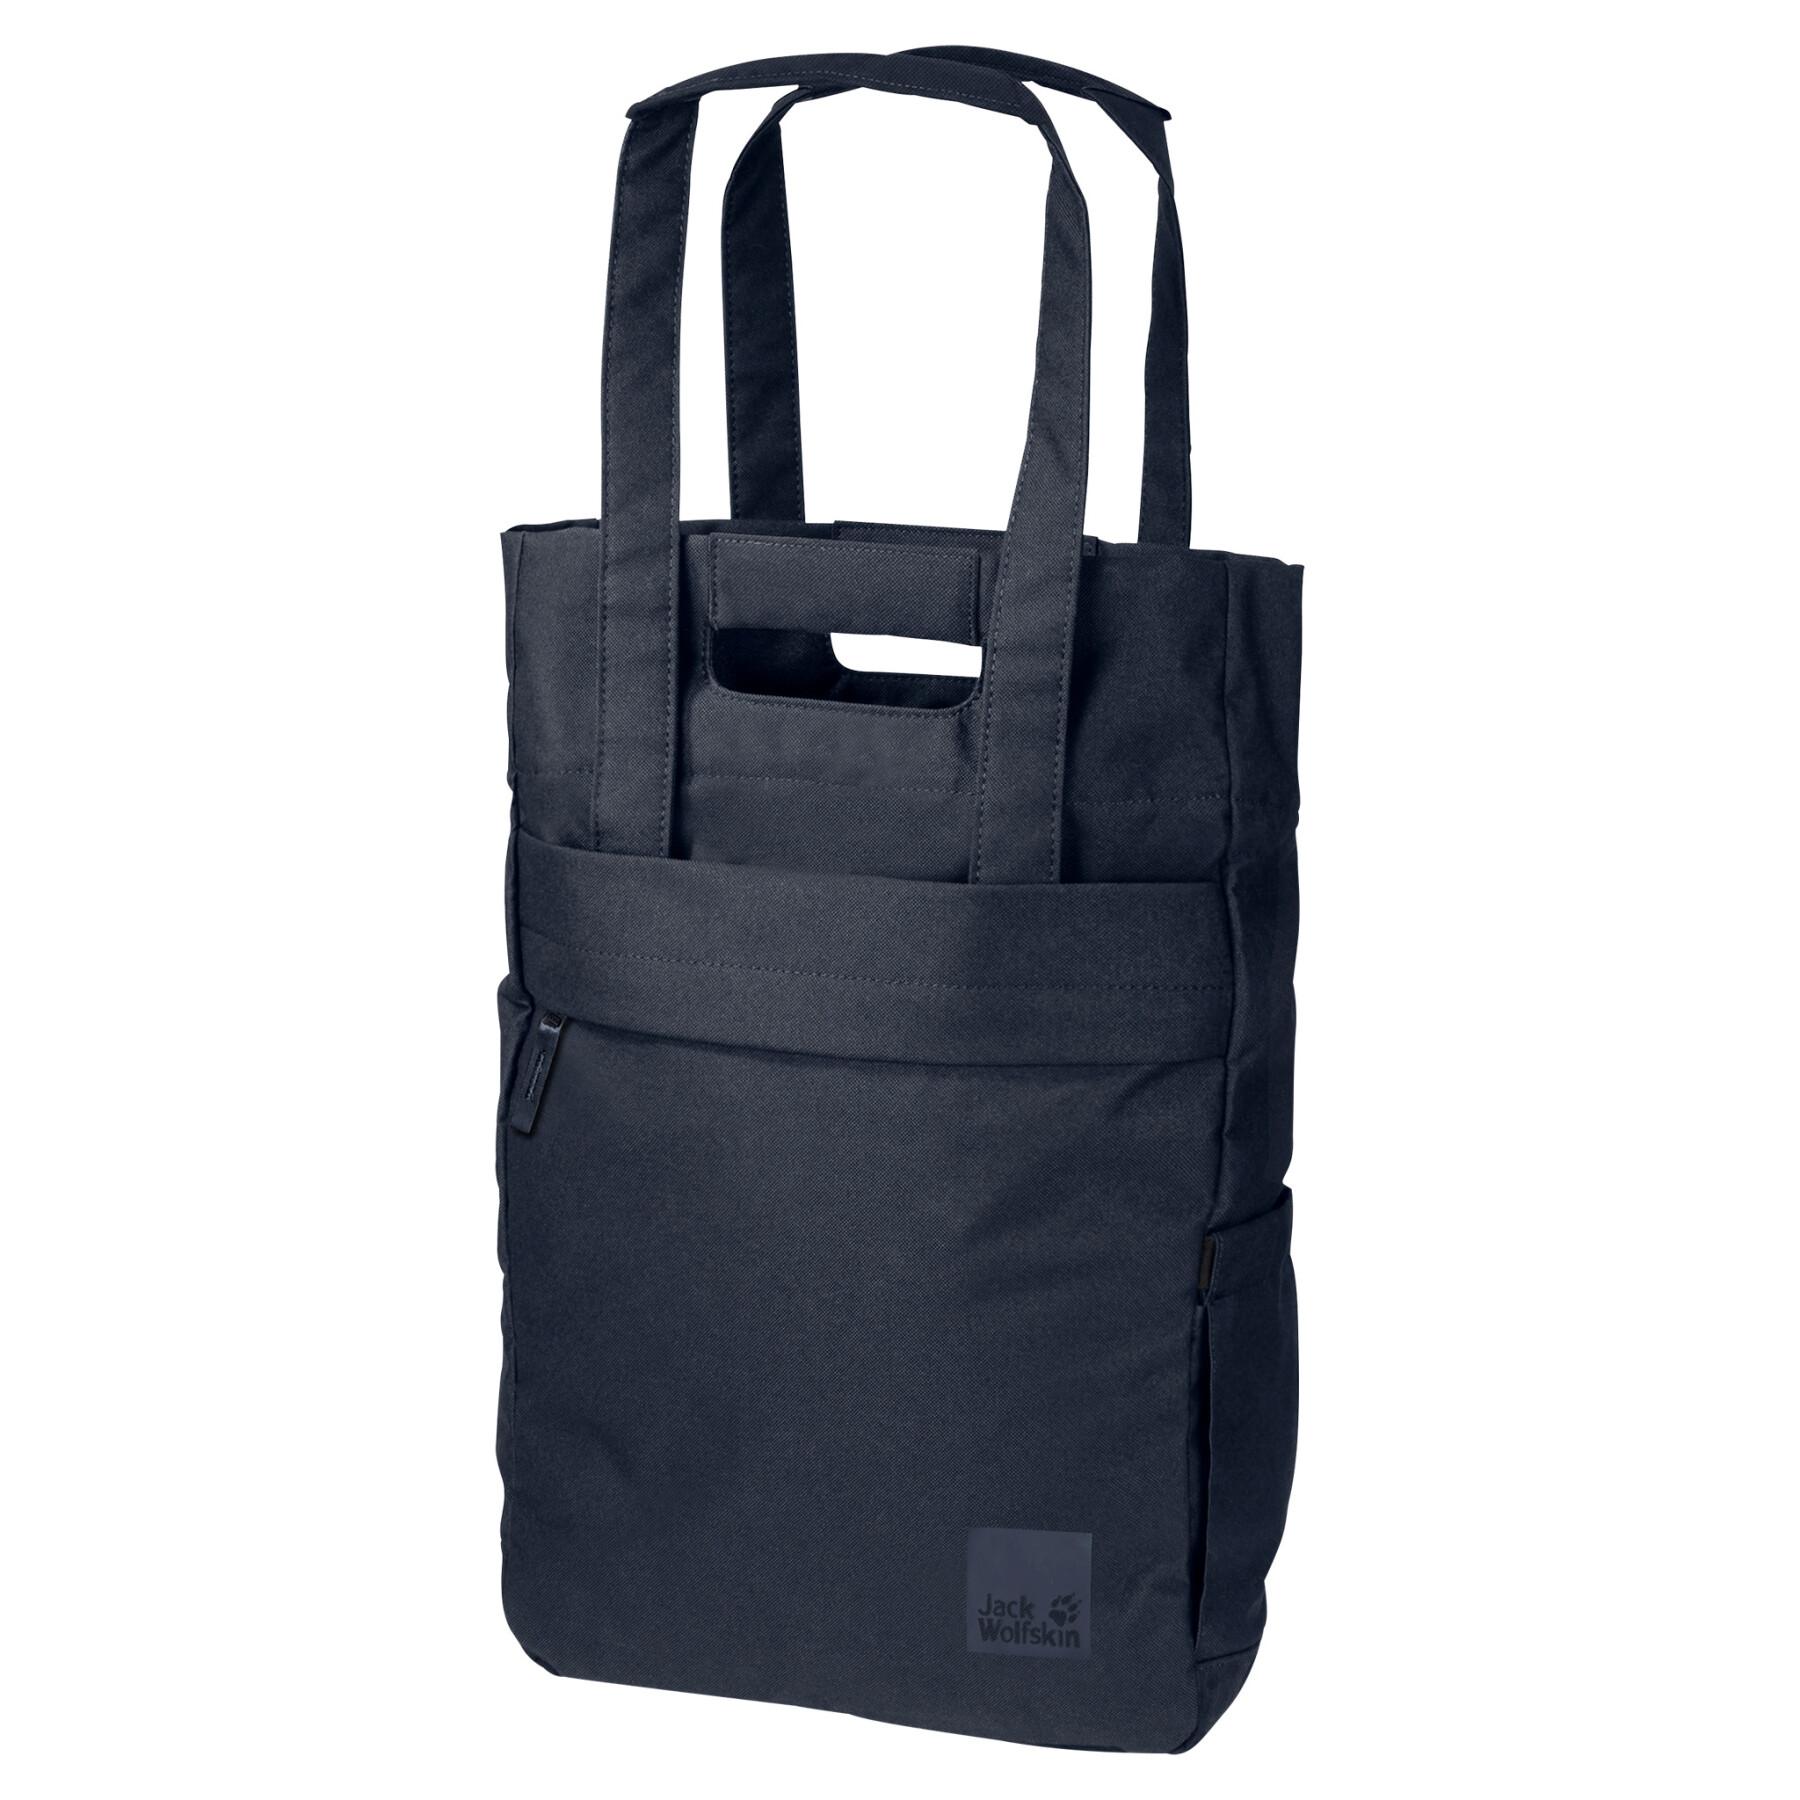 Tote bag Jack Wolfskin Piccadilly